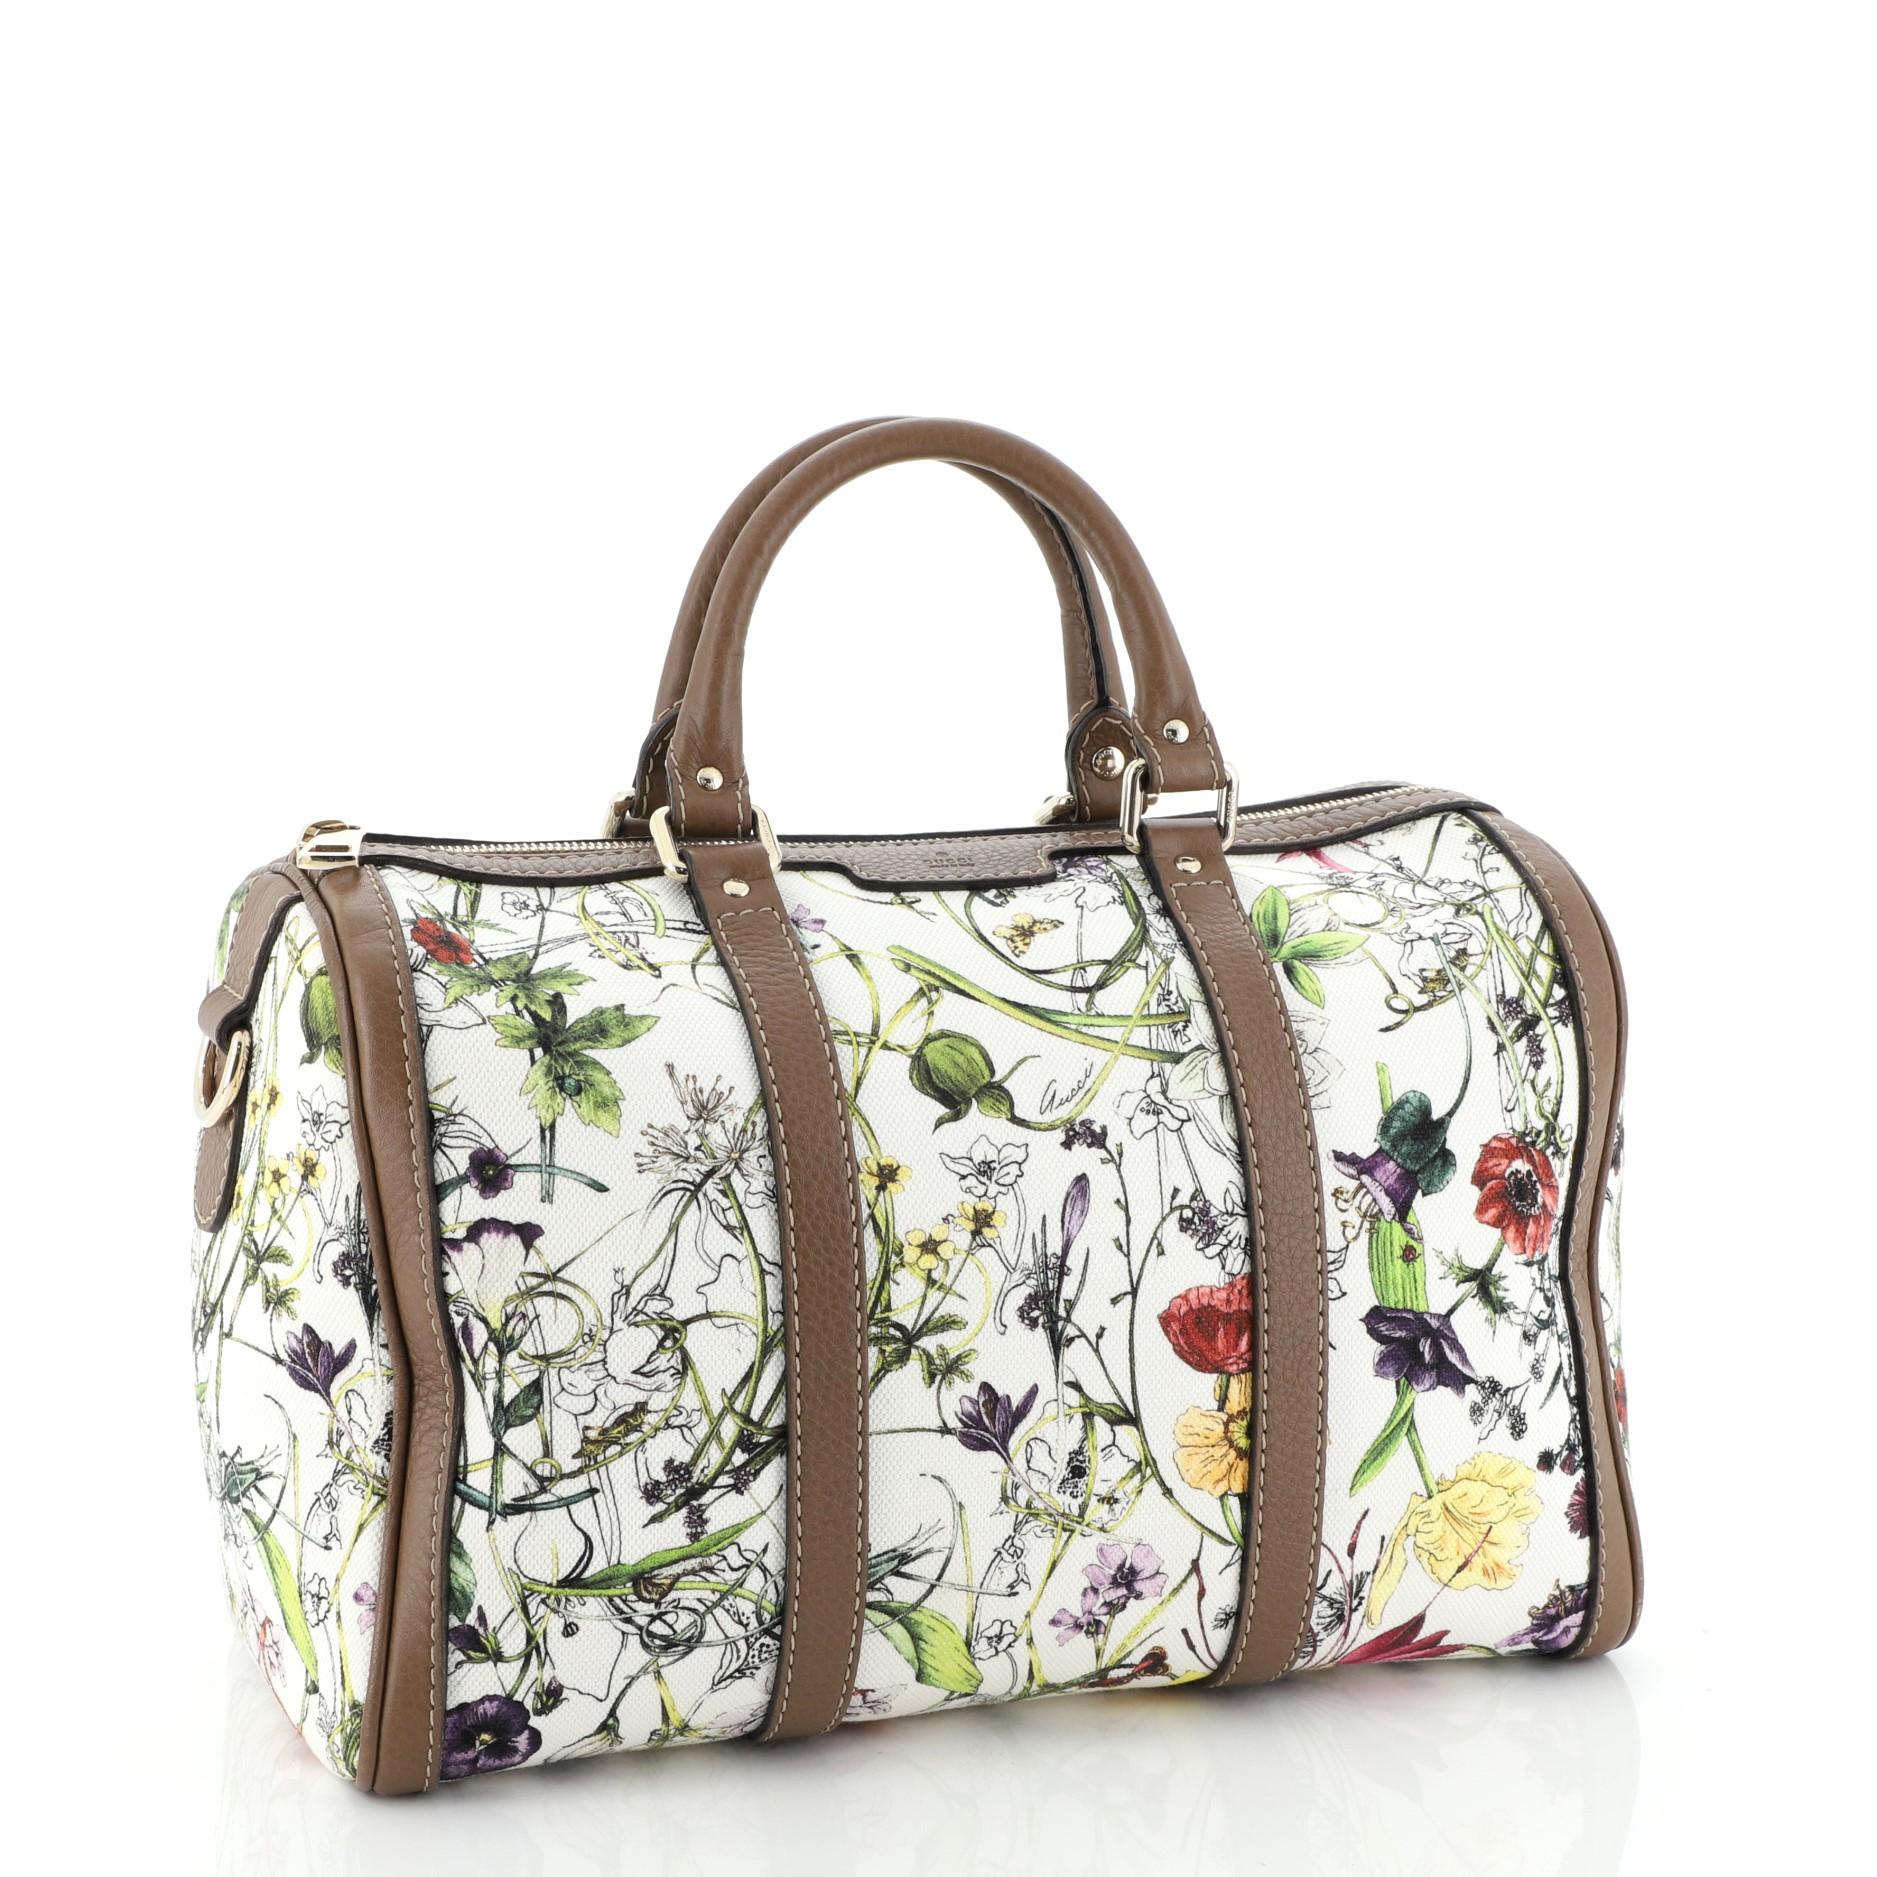 This Gucci Convertible Joy Boston Bag Flora Canvas Medium, crafted in white canvas with flora print overlay, features dual rolled leather handles, leather trim, and gold-tone hardware. Its zip closure opens to a neutral canvas interior with side zip